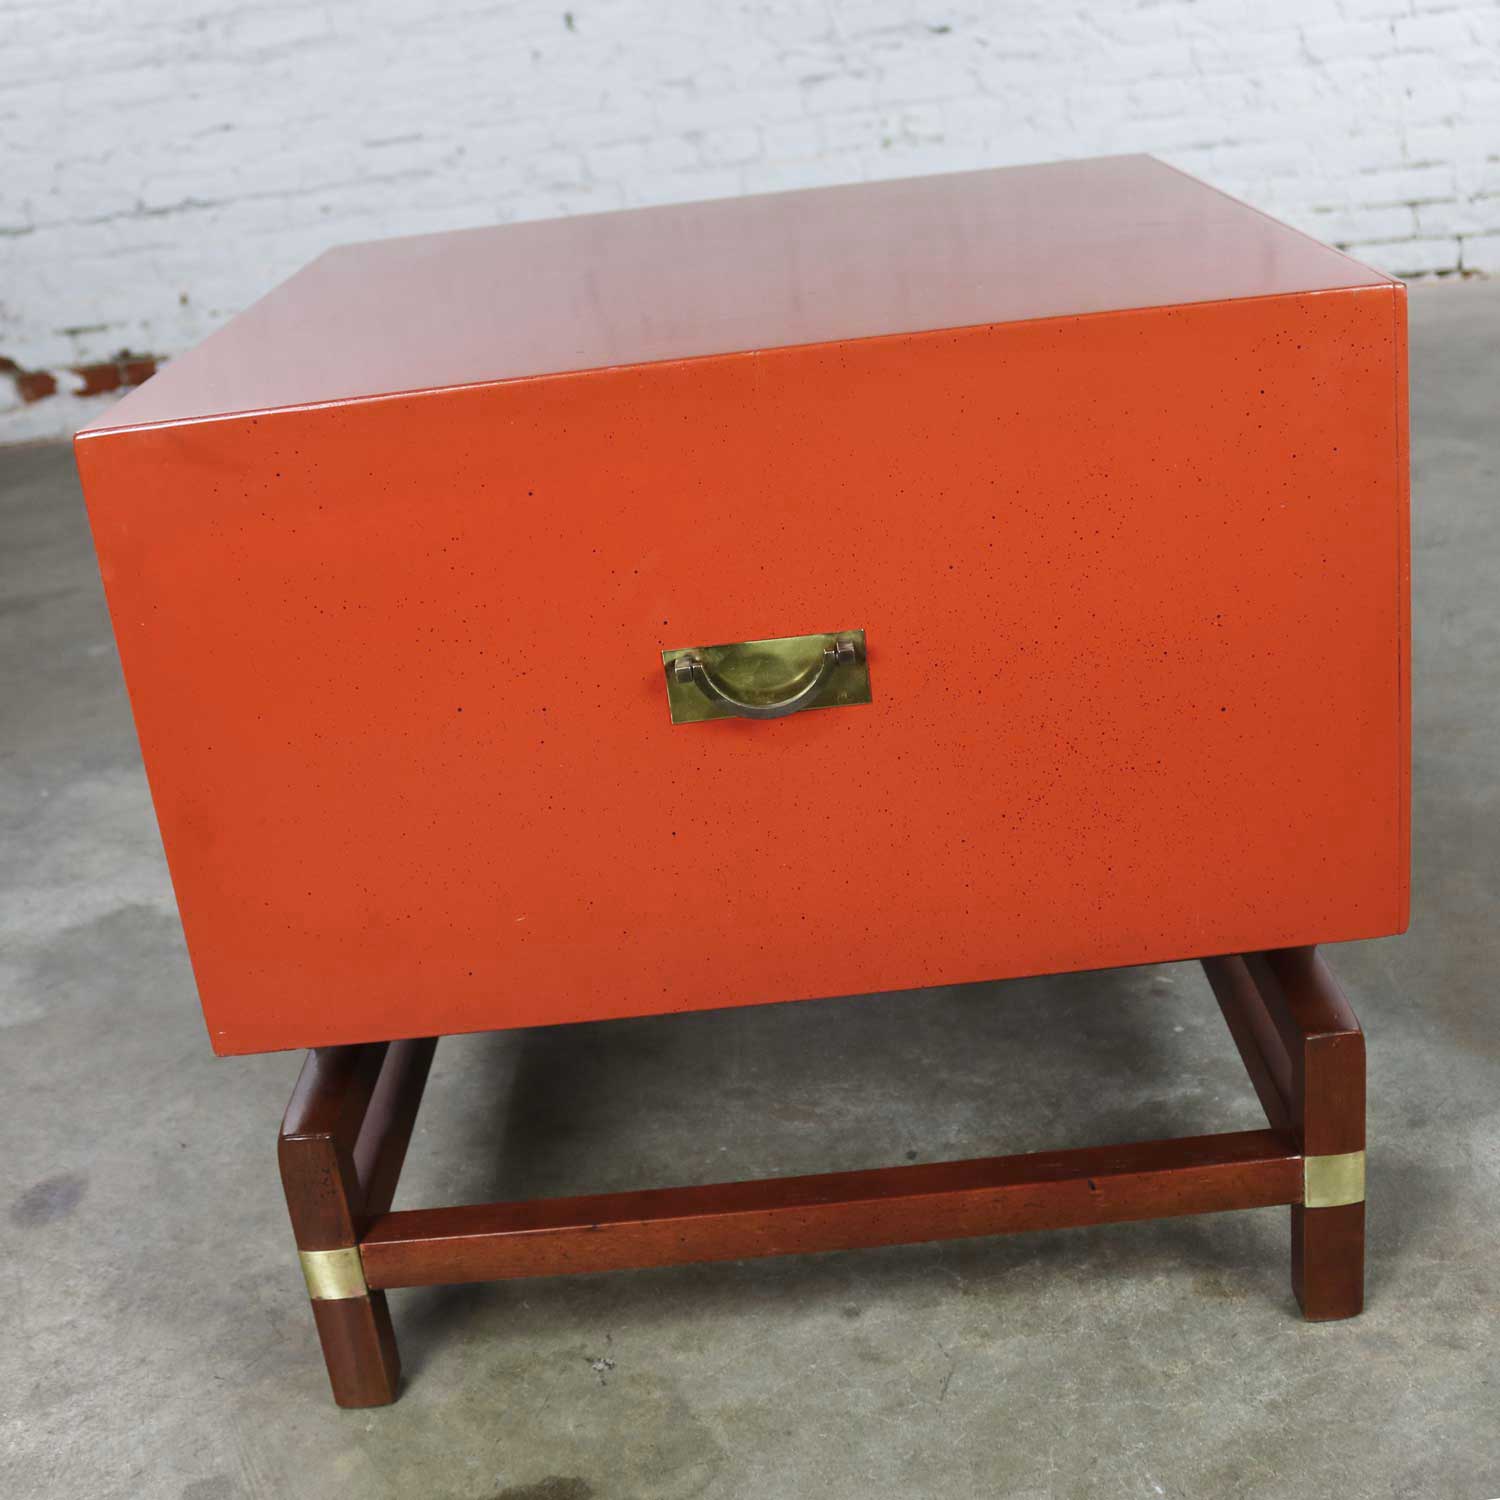 Vintage Red Campaign Style End Table with Drawers & Door & Brass Detail by Hickory